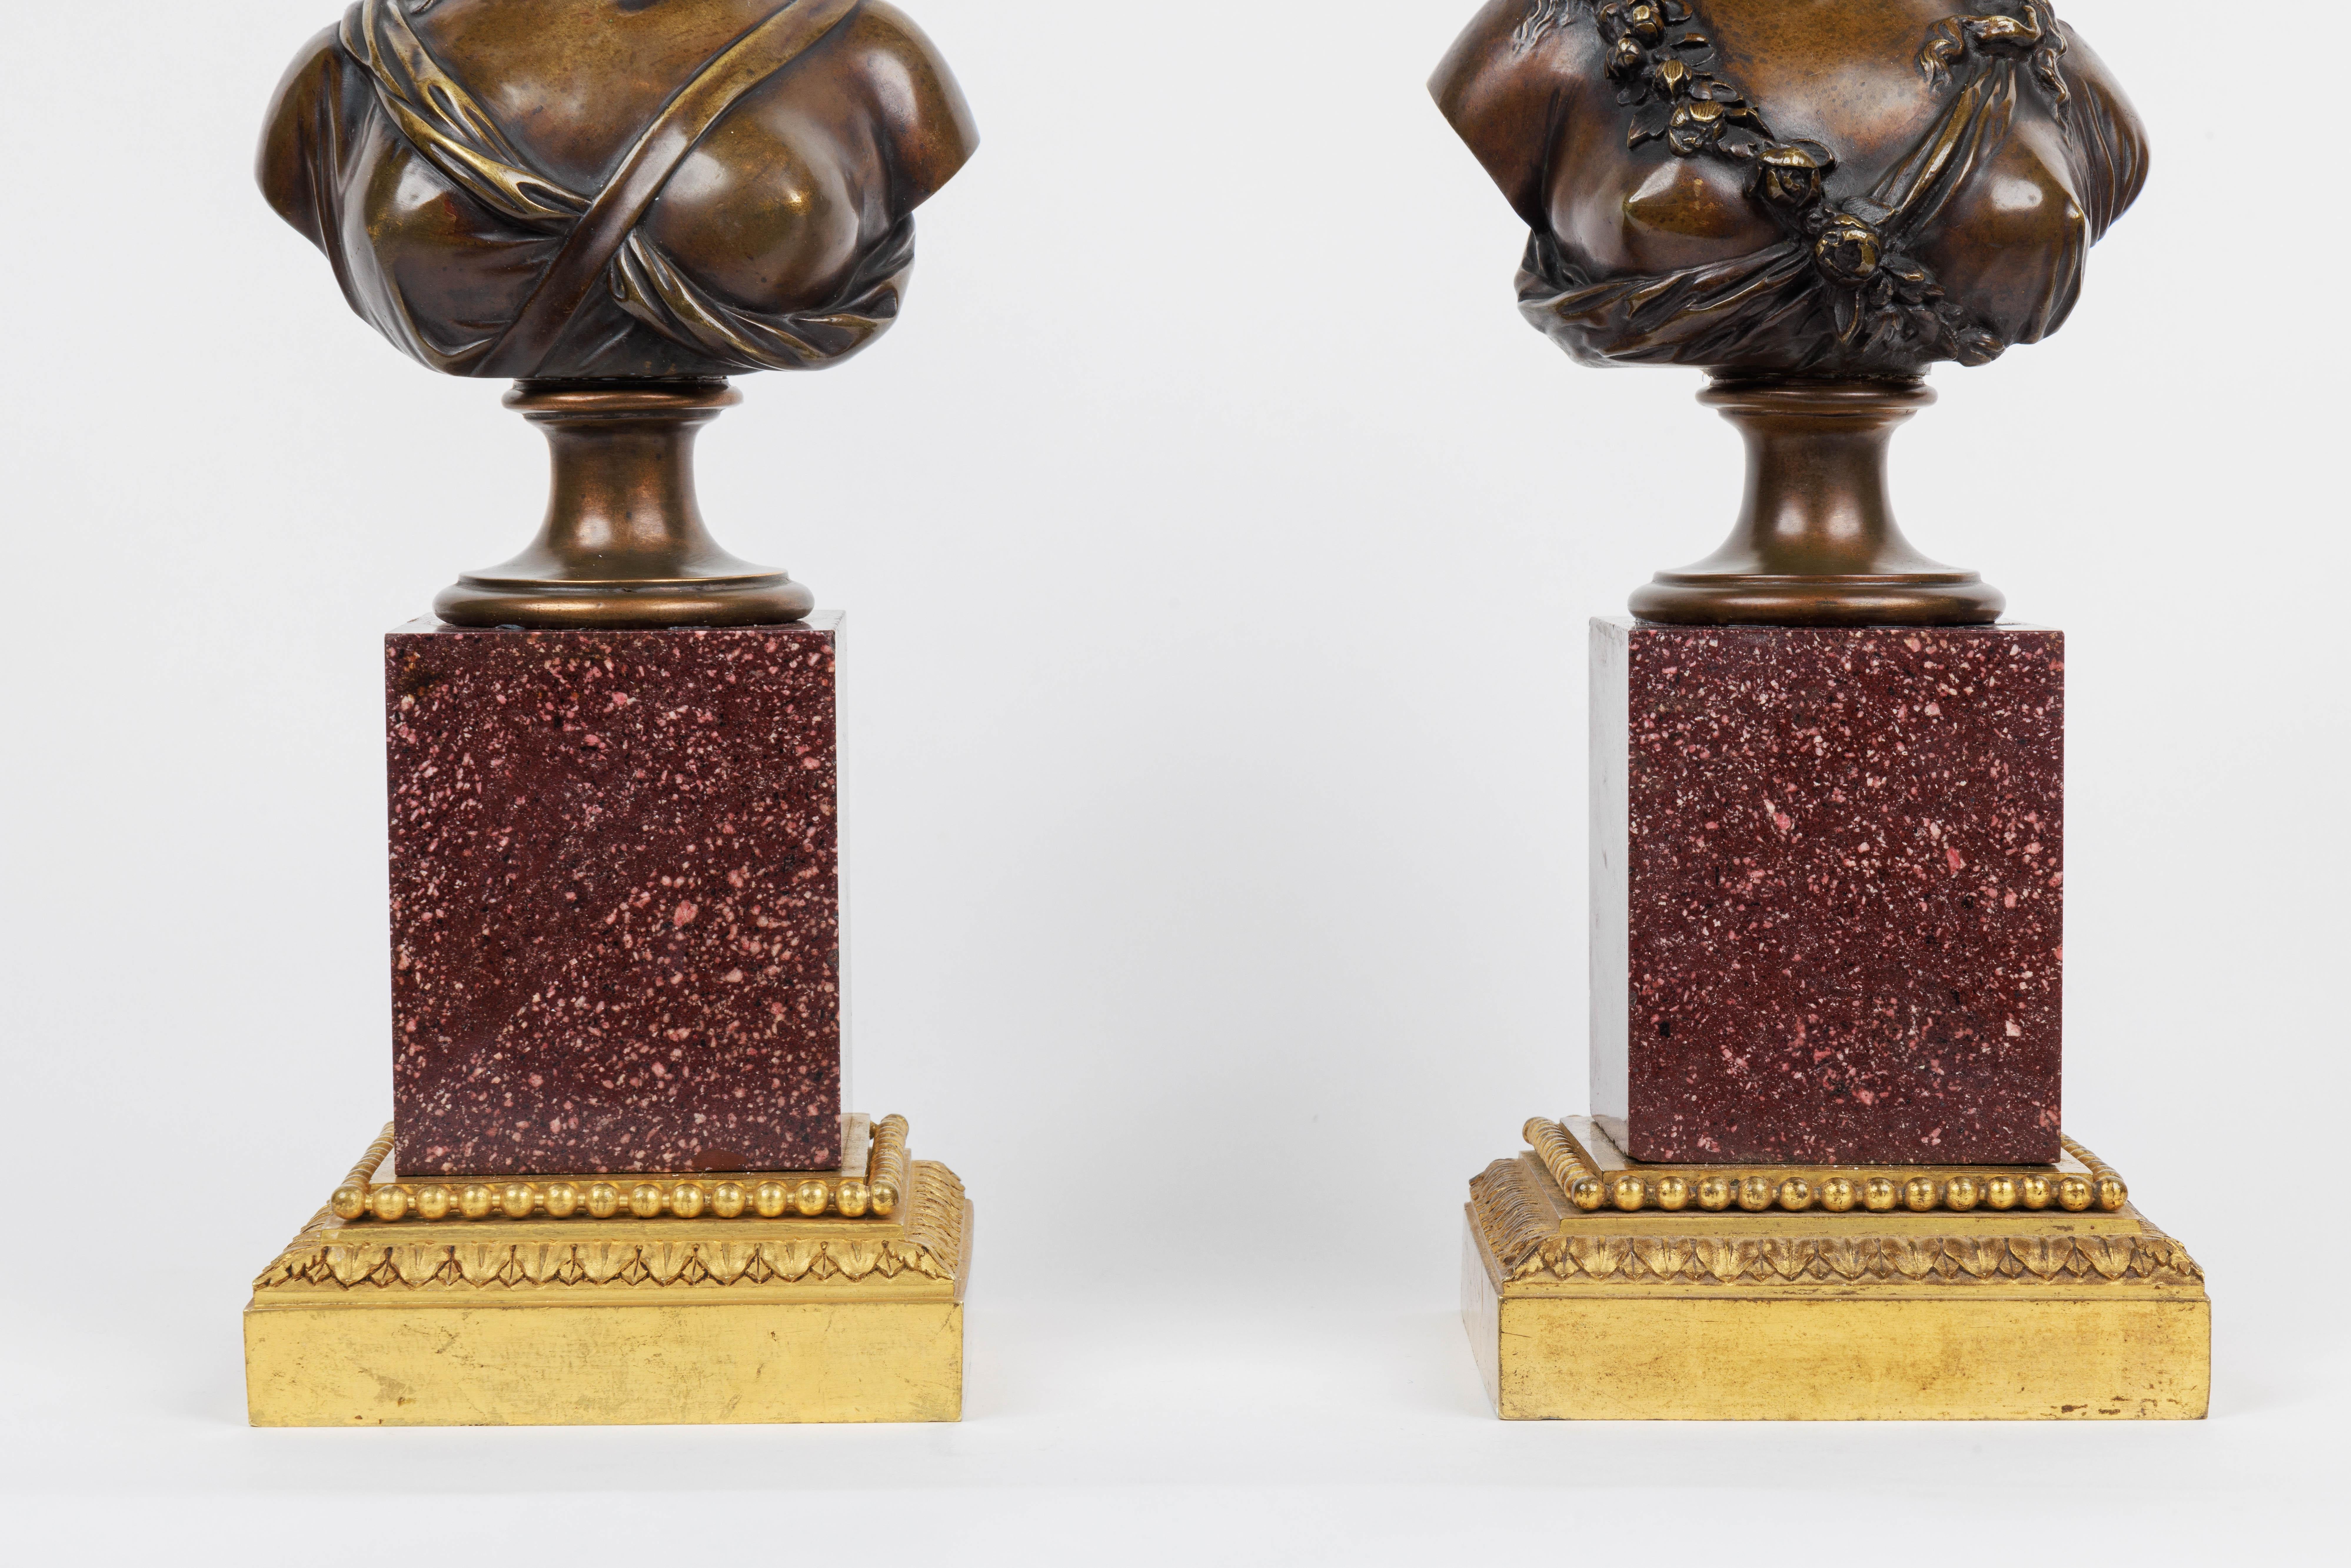 Napoleon III Pair of French Ormolu and Patinated Bronze Figural Busts on Porphyry Bases For Sale